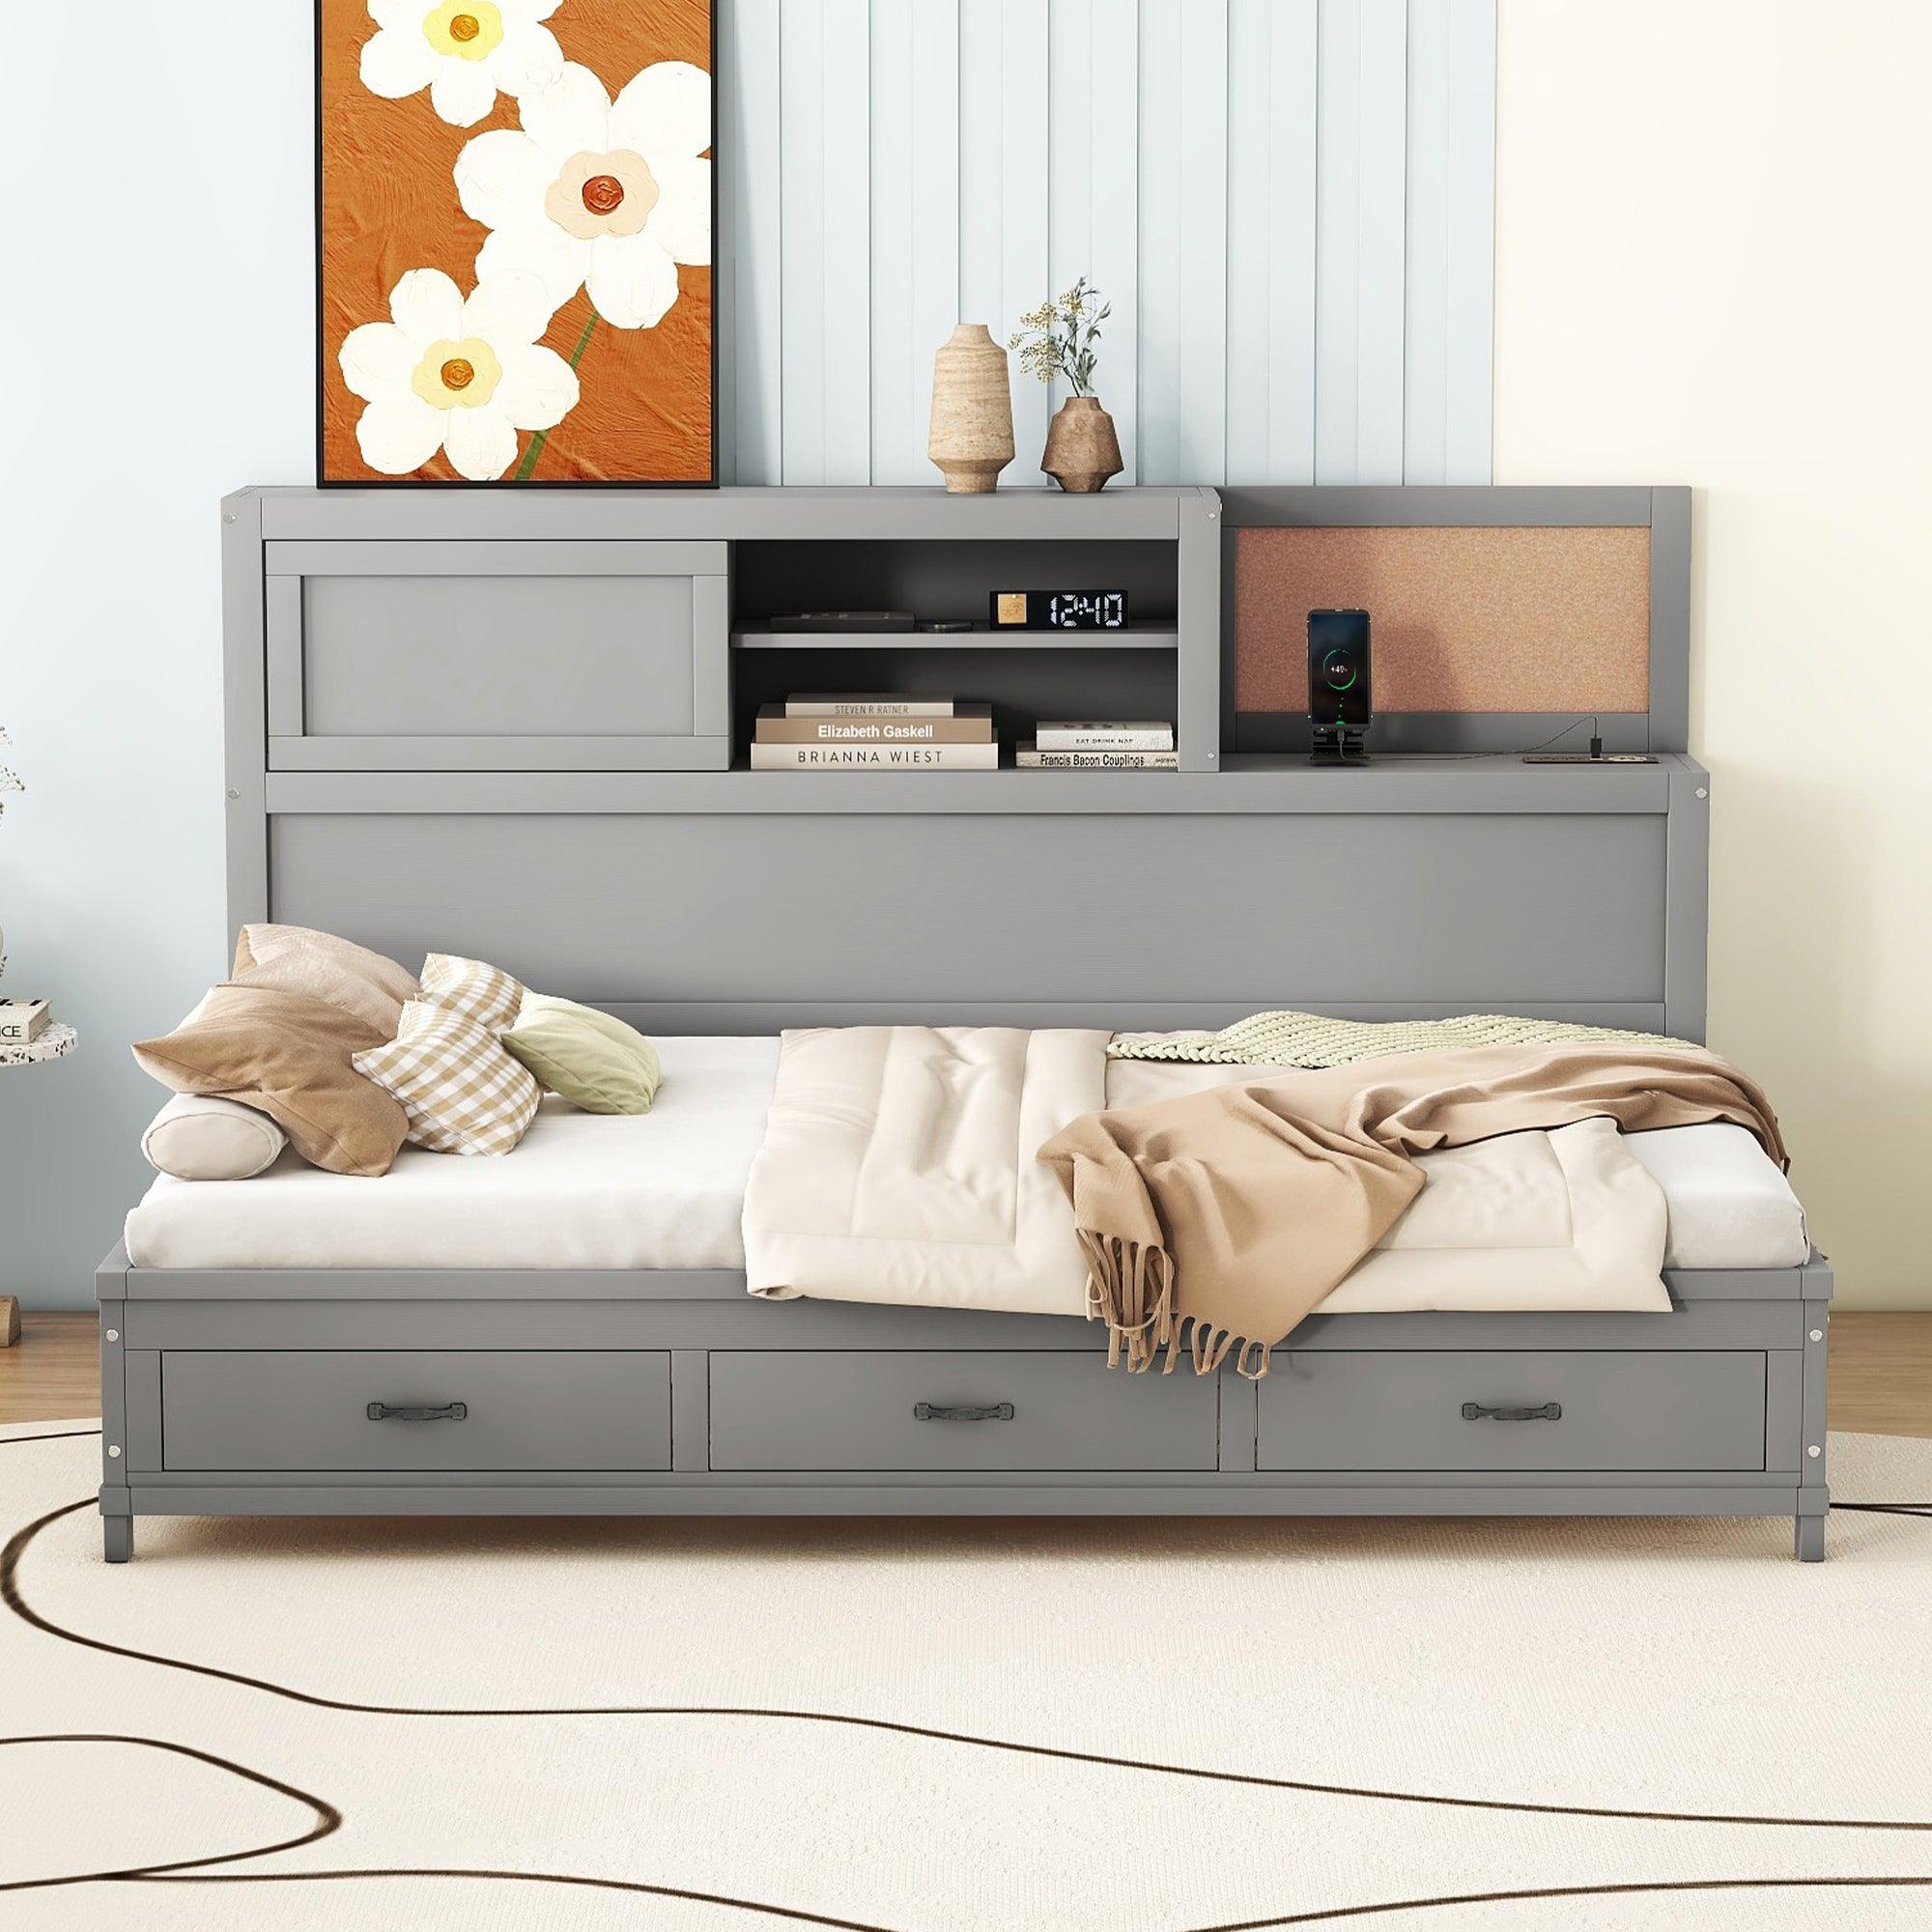 🆓🚛 Full Size Wooden Daybed With 3 Storage Drawers, Upper Soft Board, Shelf, Set Of Sockets & Usb Ports, Gray